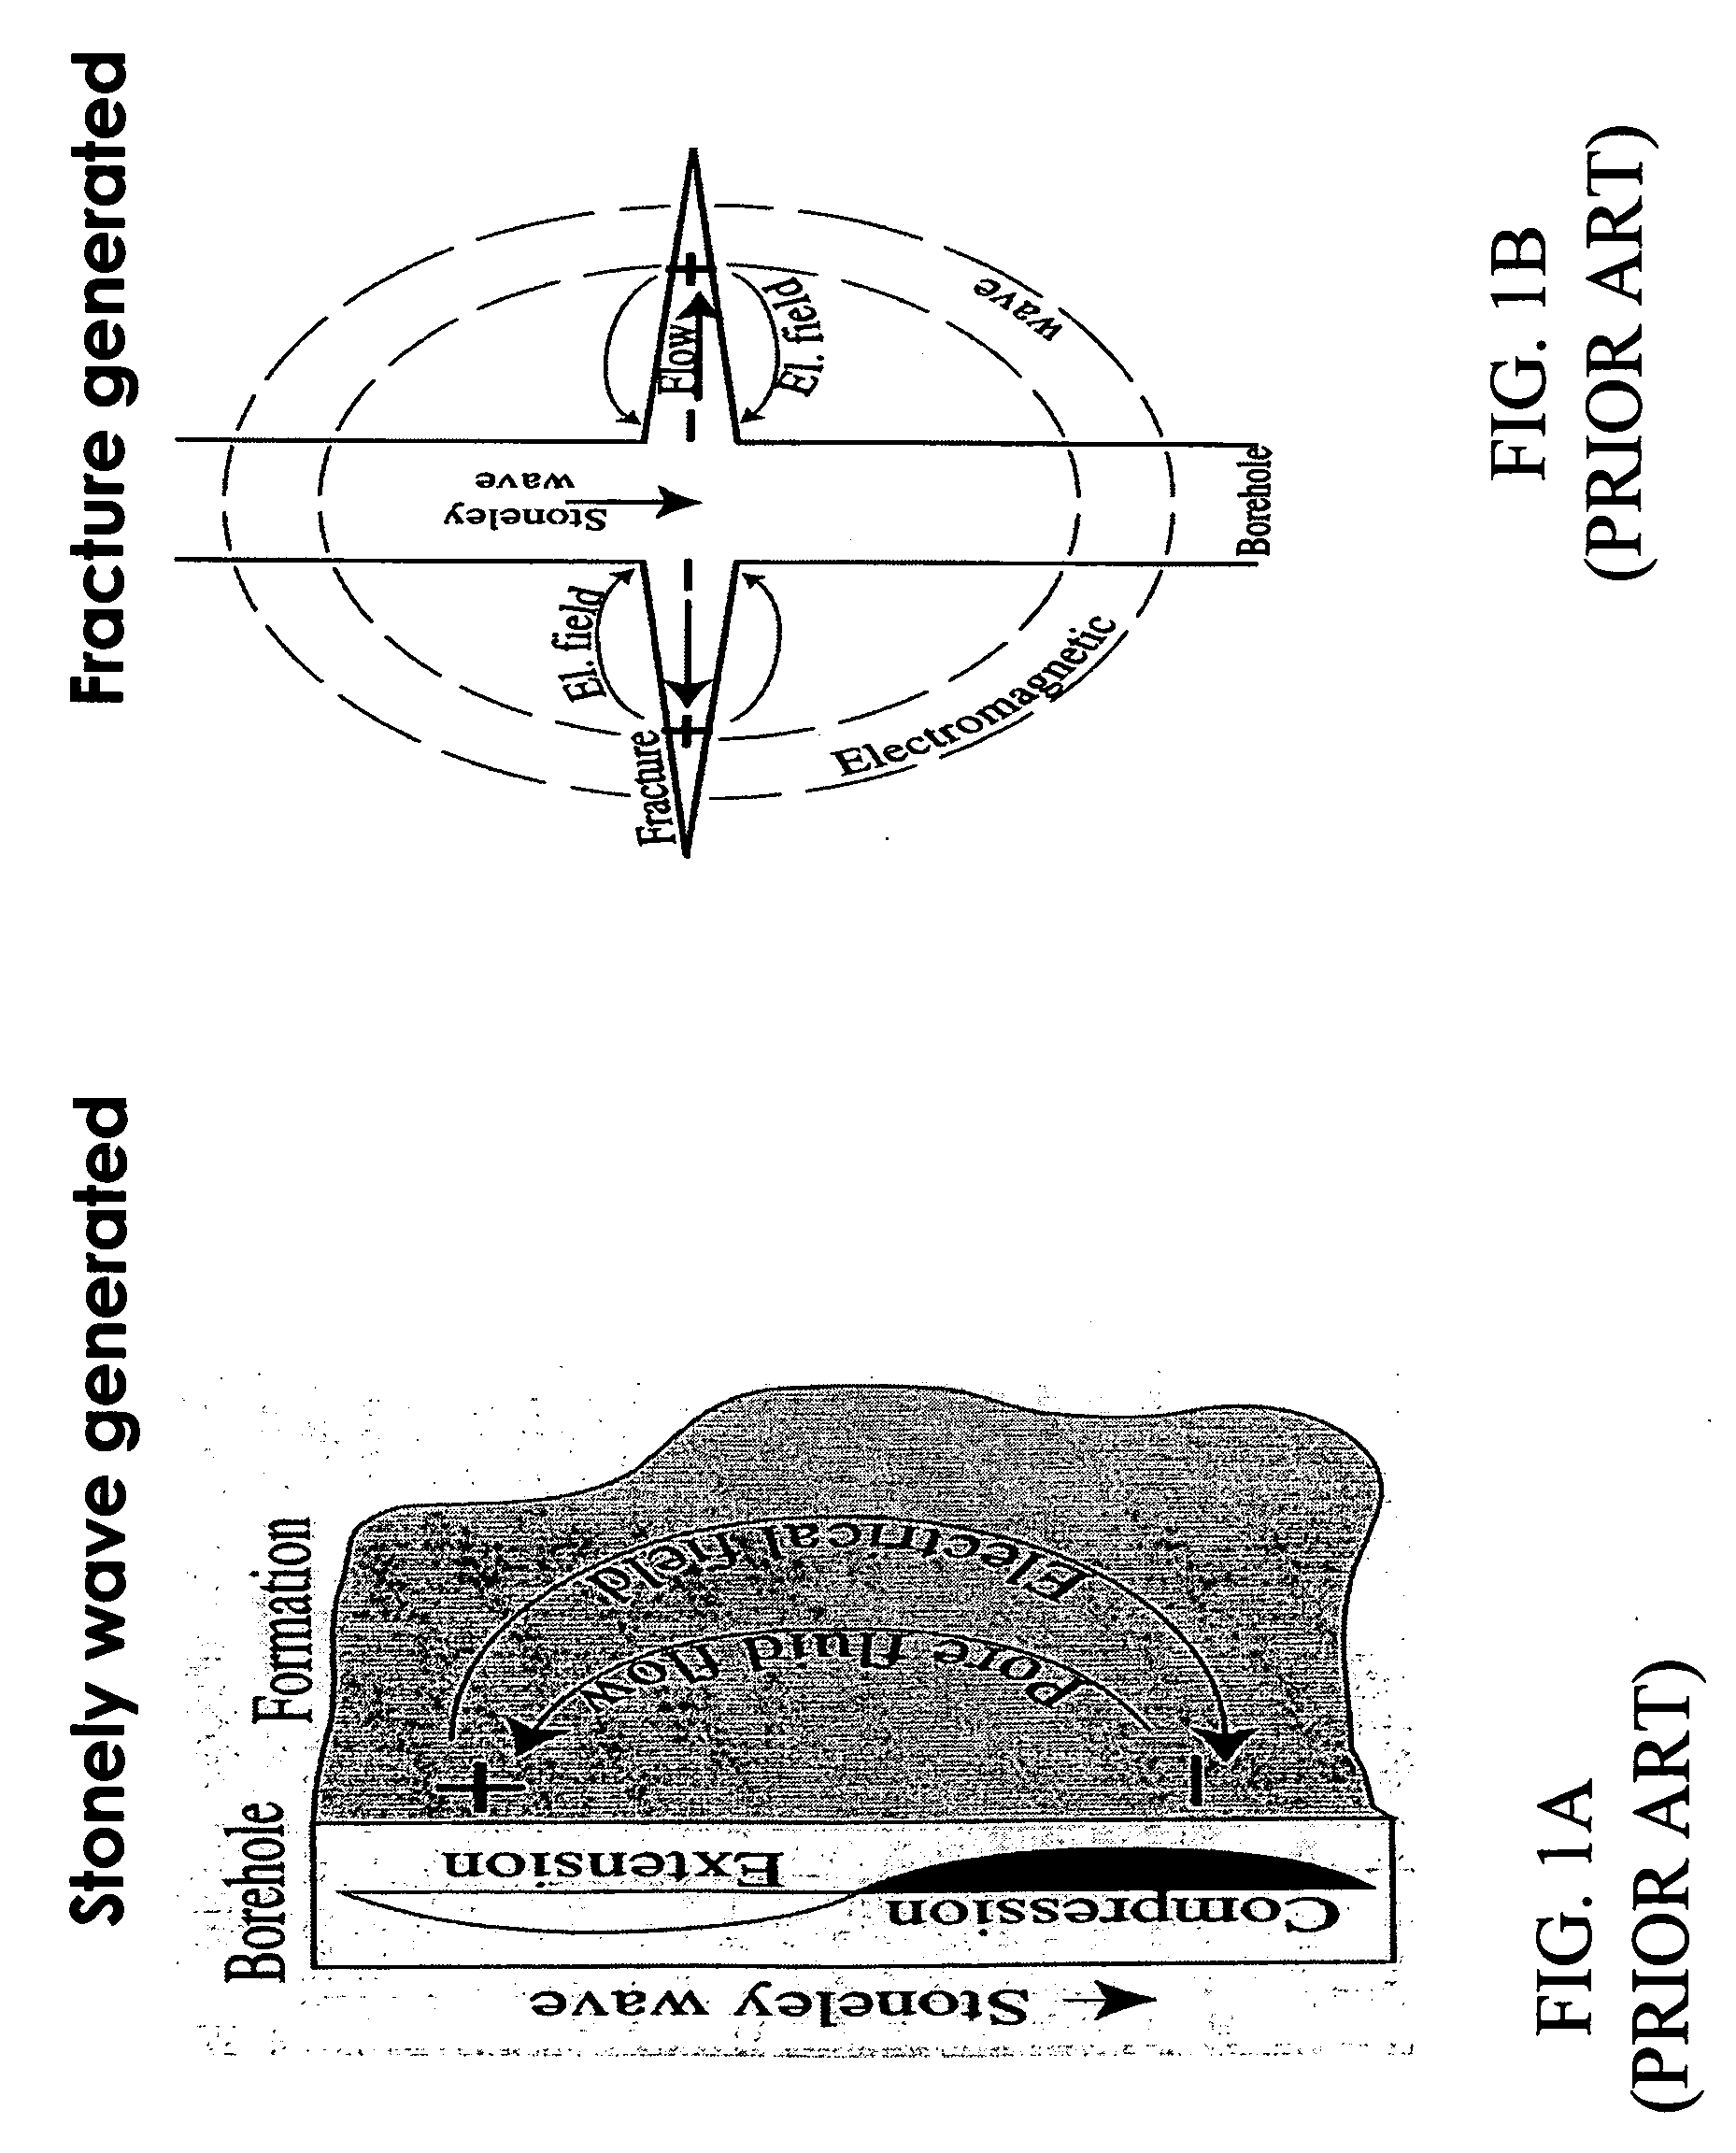 Method for acquiring and interpreting seismoelectric and eletroseismic data